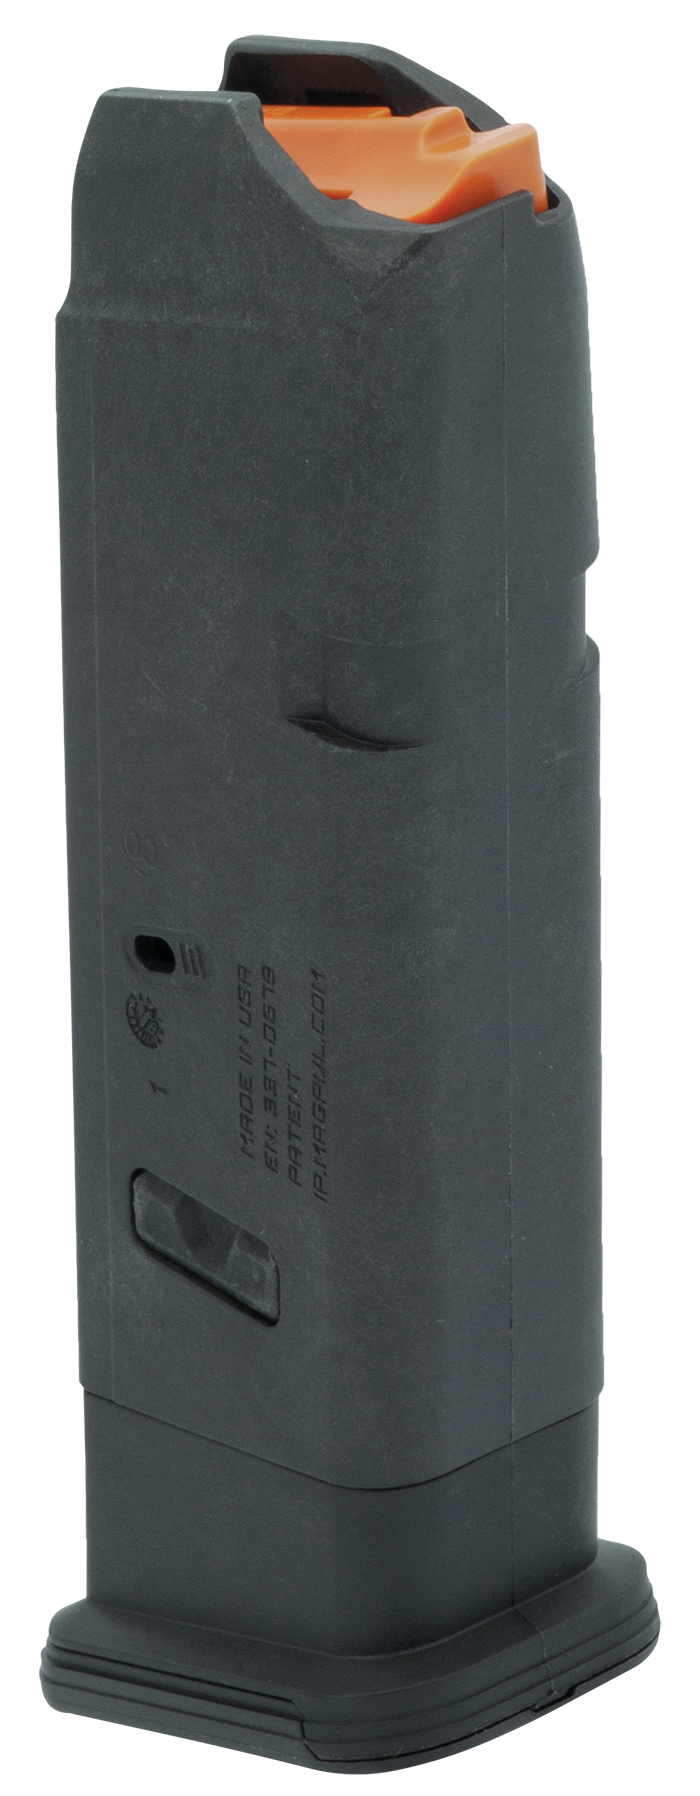 9MM 10RD Magazine 10 Round Mag for Glock 17 34 19 26 FS Magpul 801 MULTI PACK 